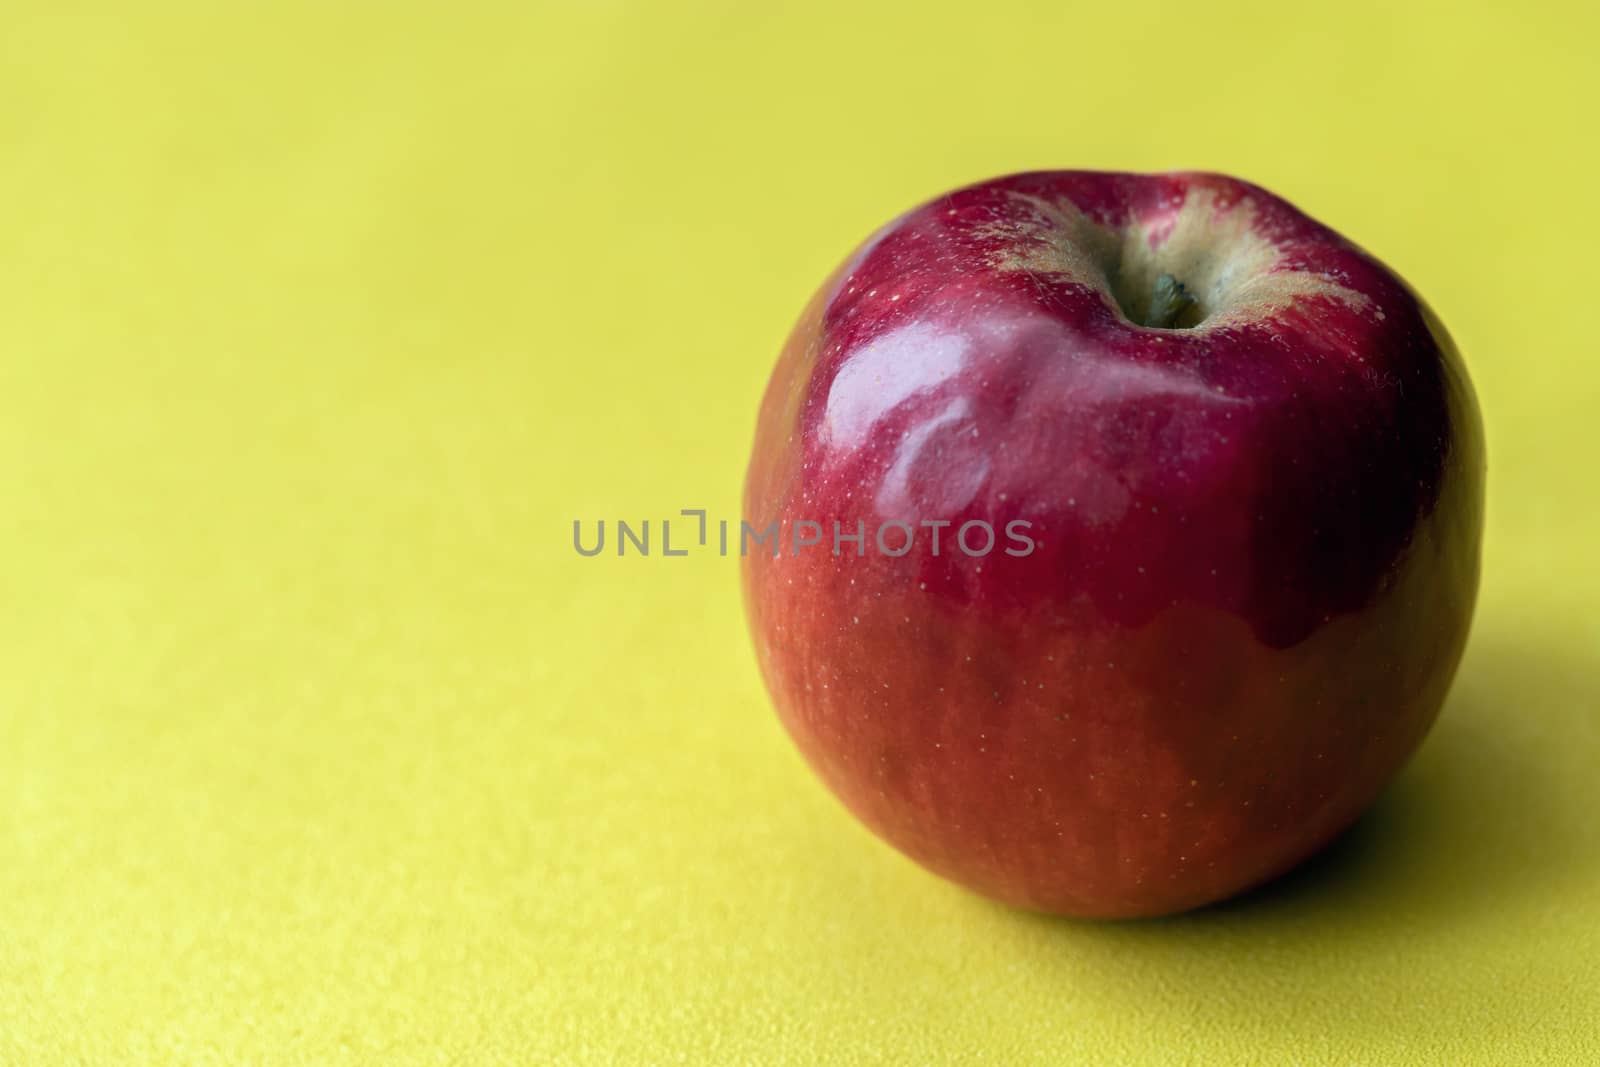 Red fresh Apple on a yellow background, isolate, free copy space for your text